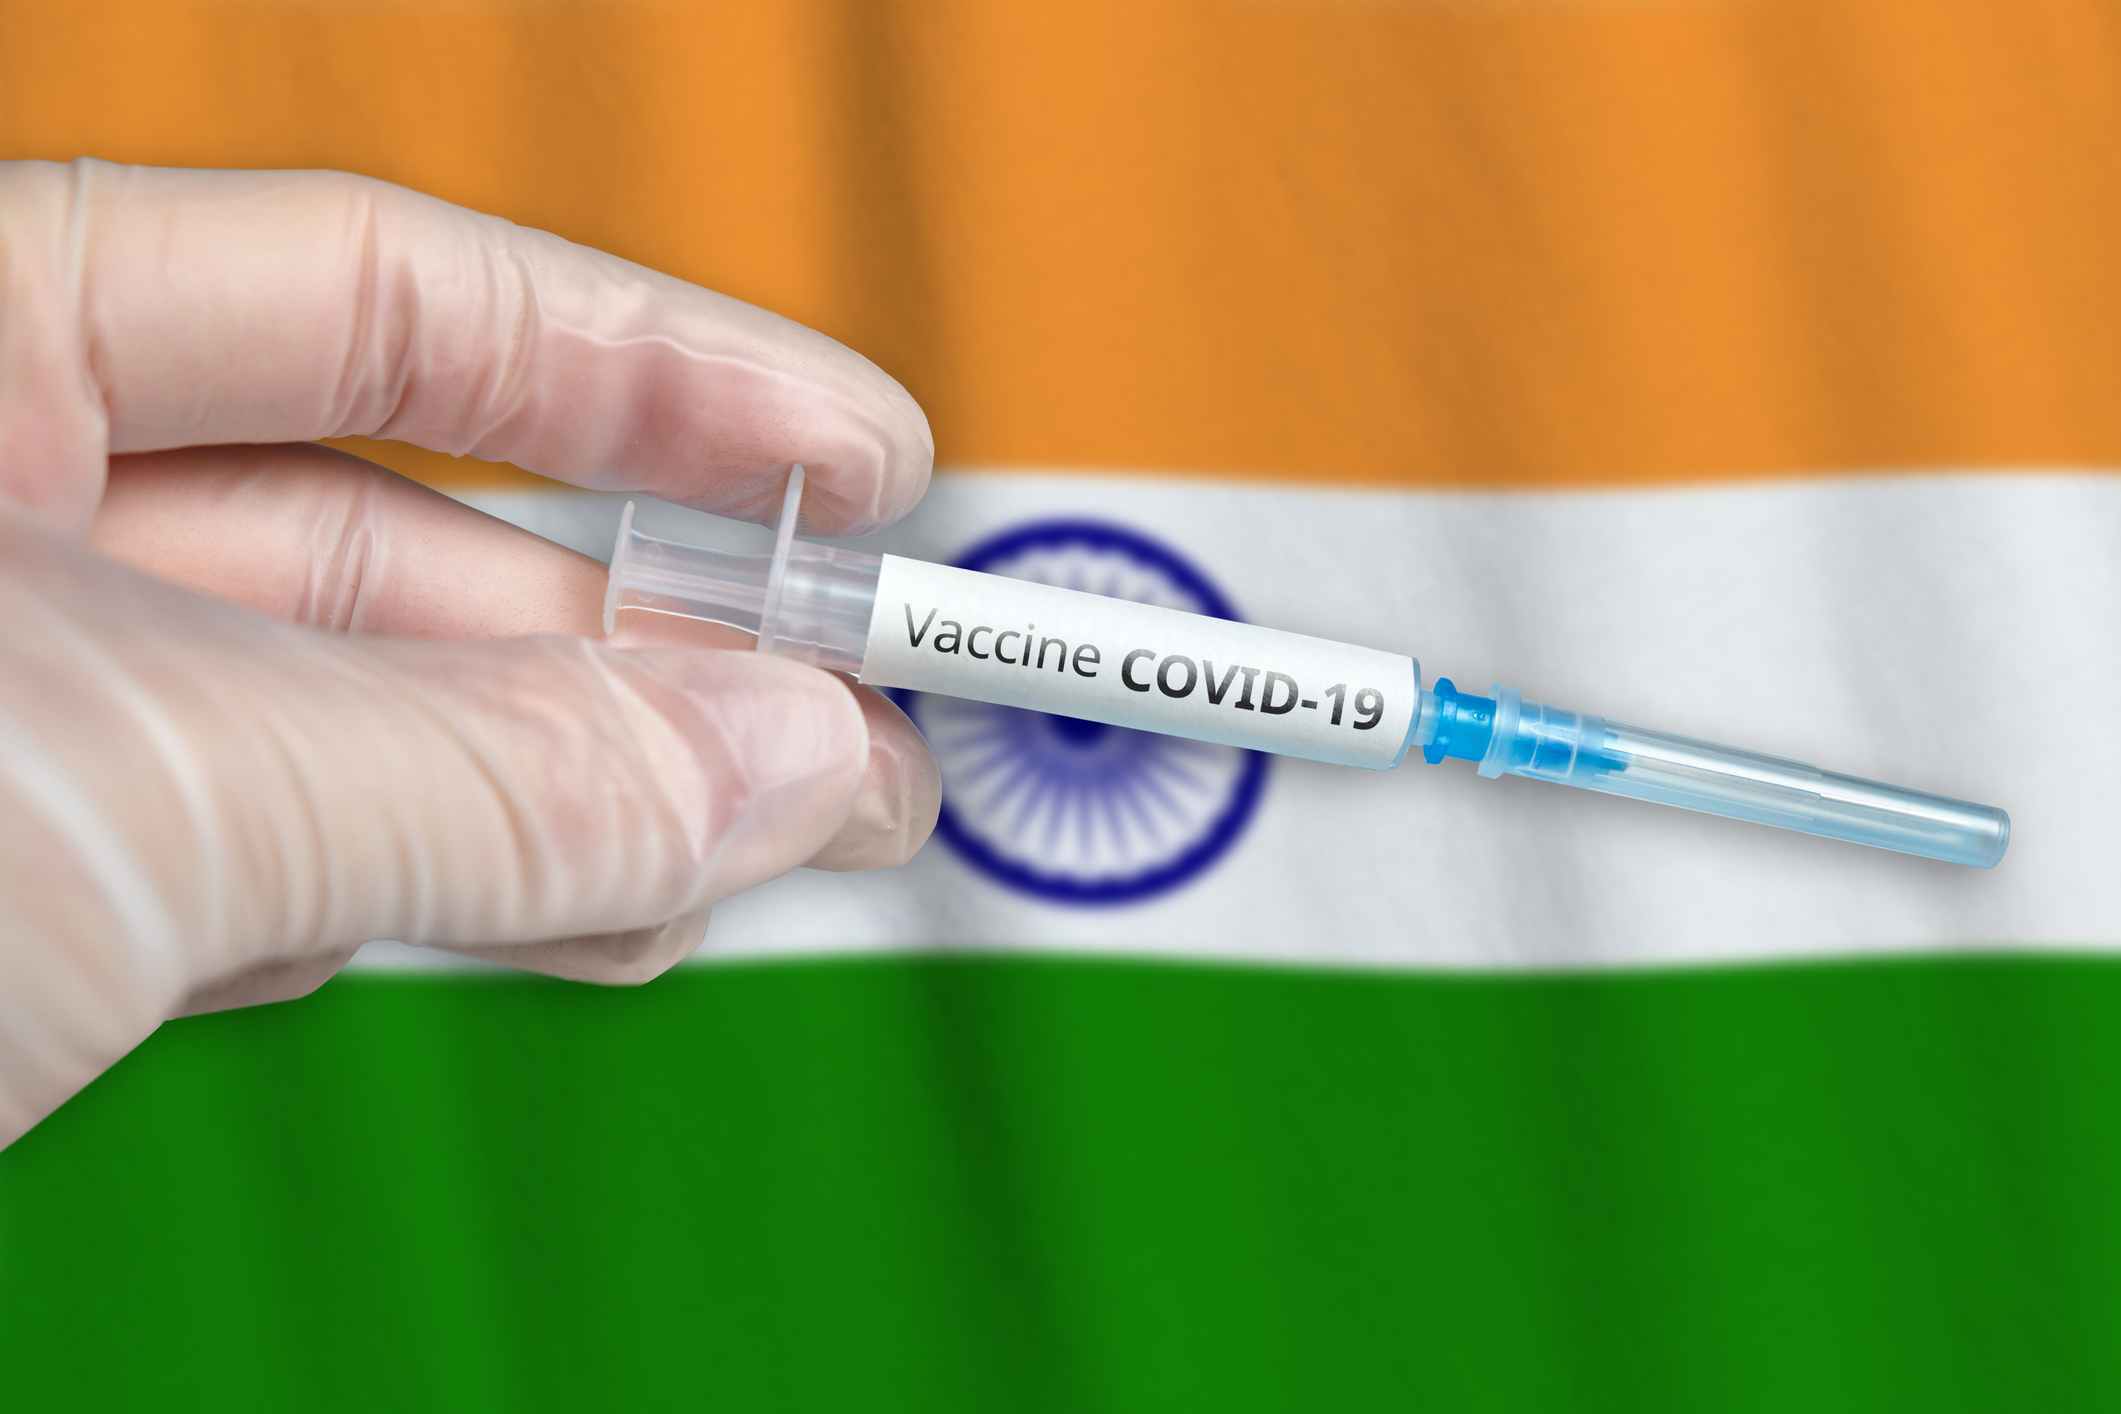 View from India: Vaccine makers explore new frontiers